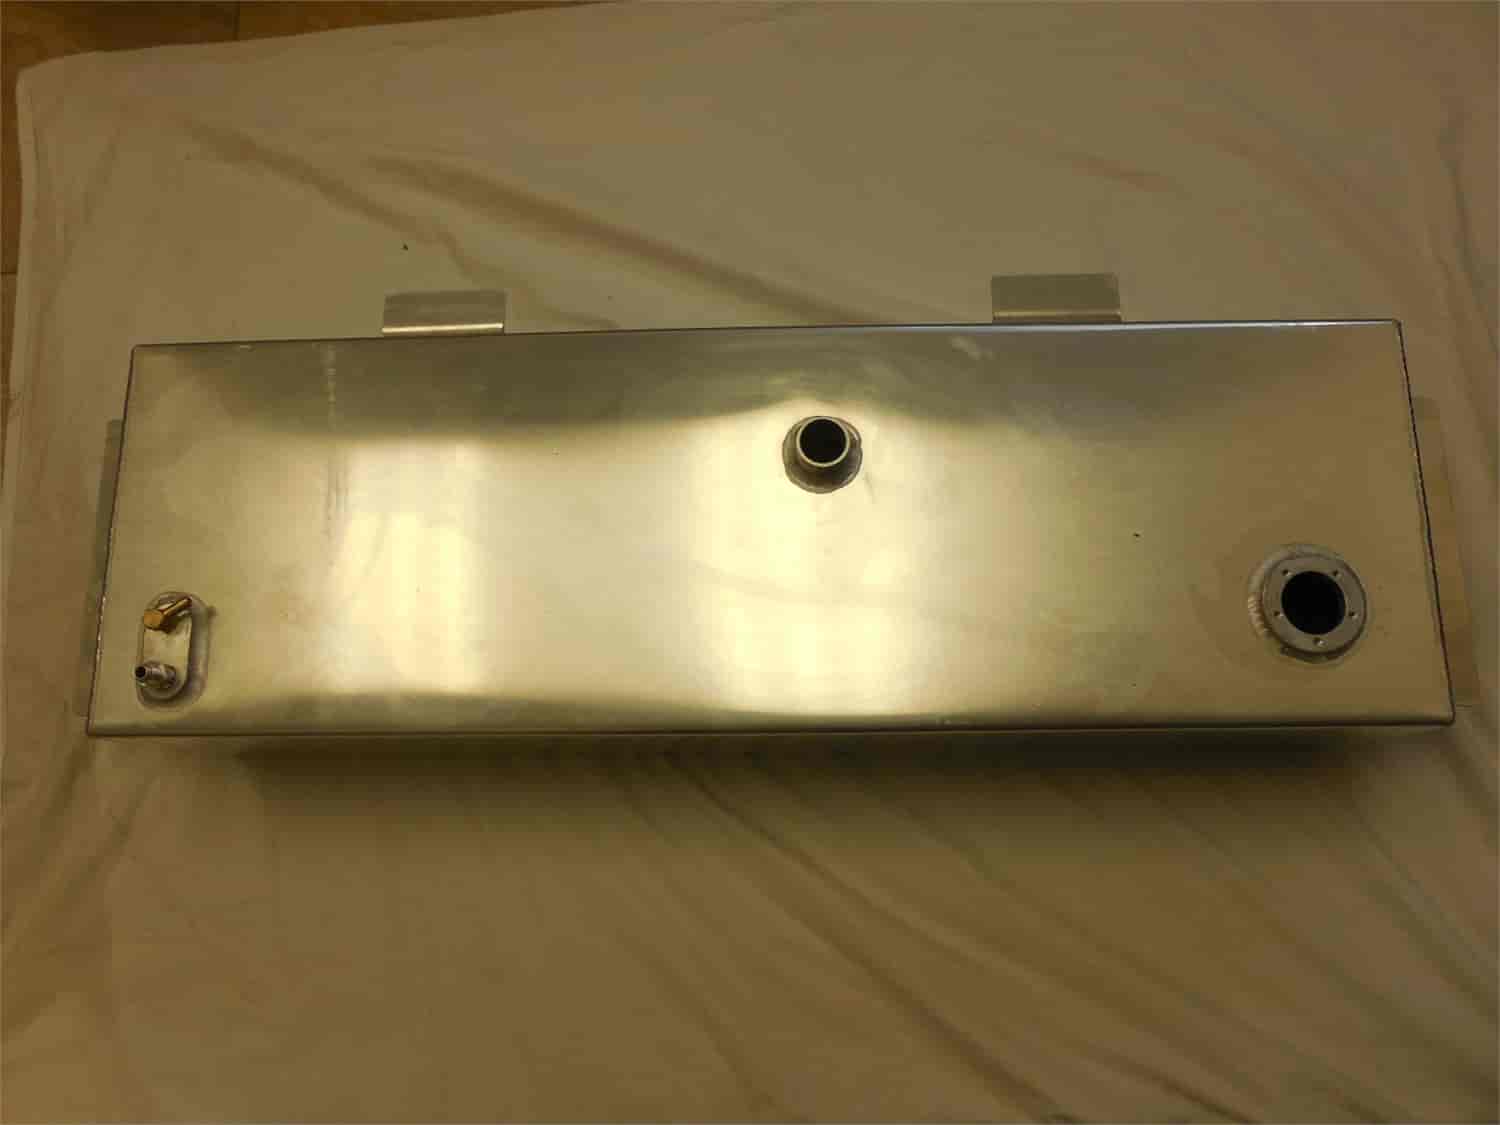 ALUM FUEL TANK 17 GALLONS FIT 1947-56 CHEVY PICKUP - CLEAR ANODIZED